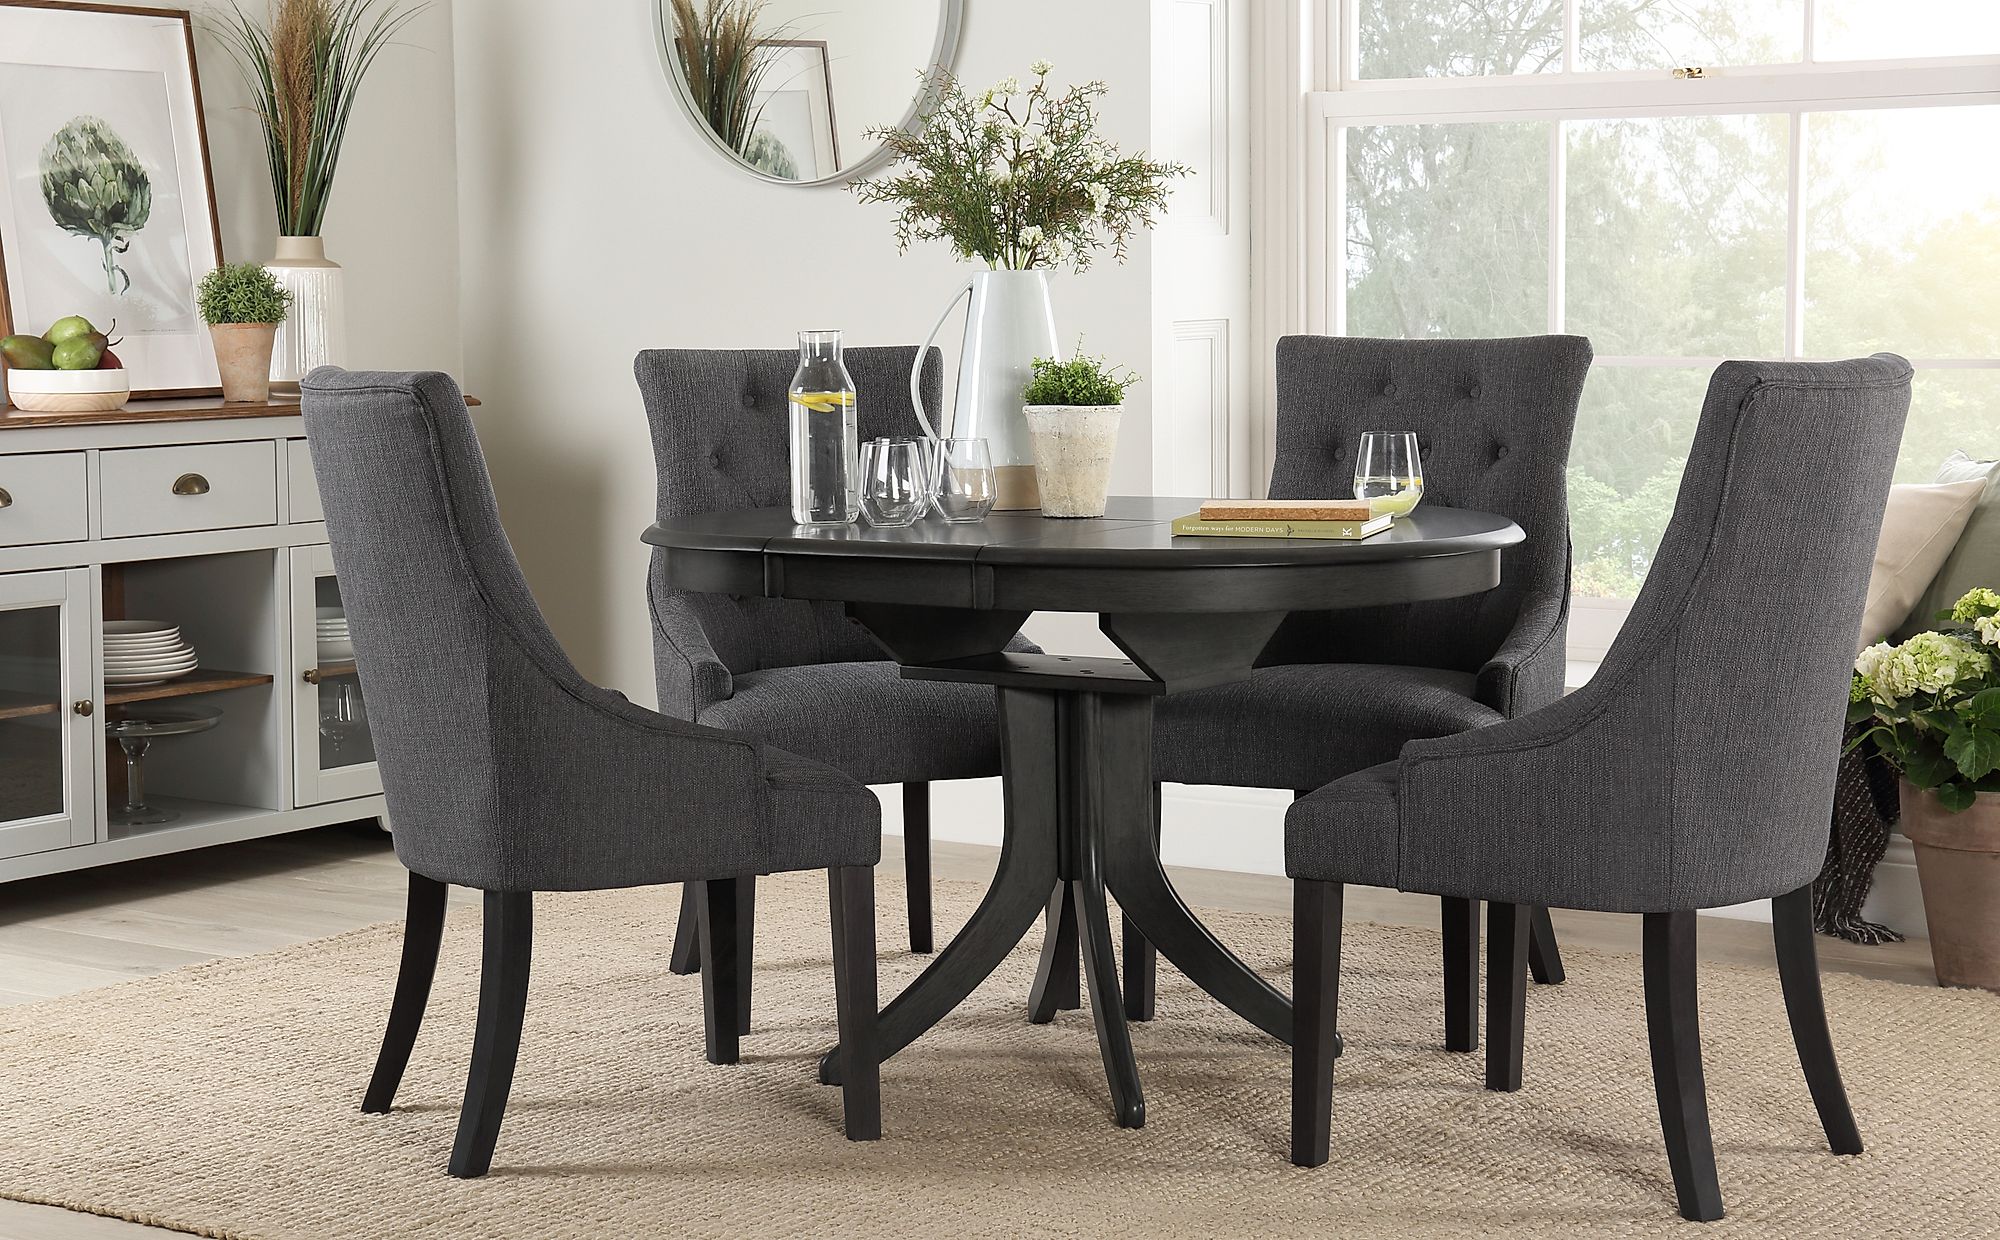 Extending Dining Room Table And 4 Chairs / 20 Best Collection of Small